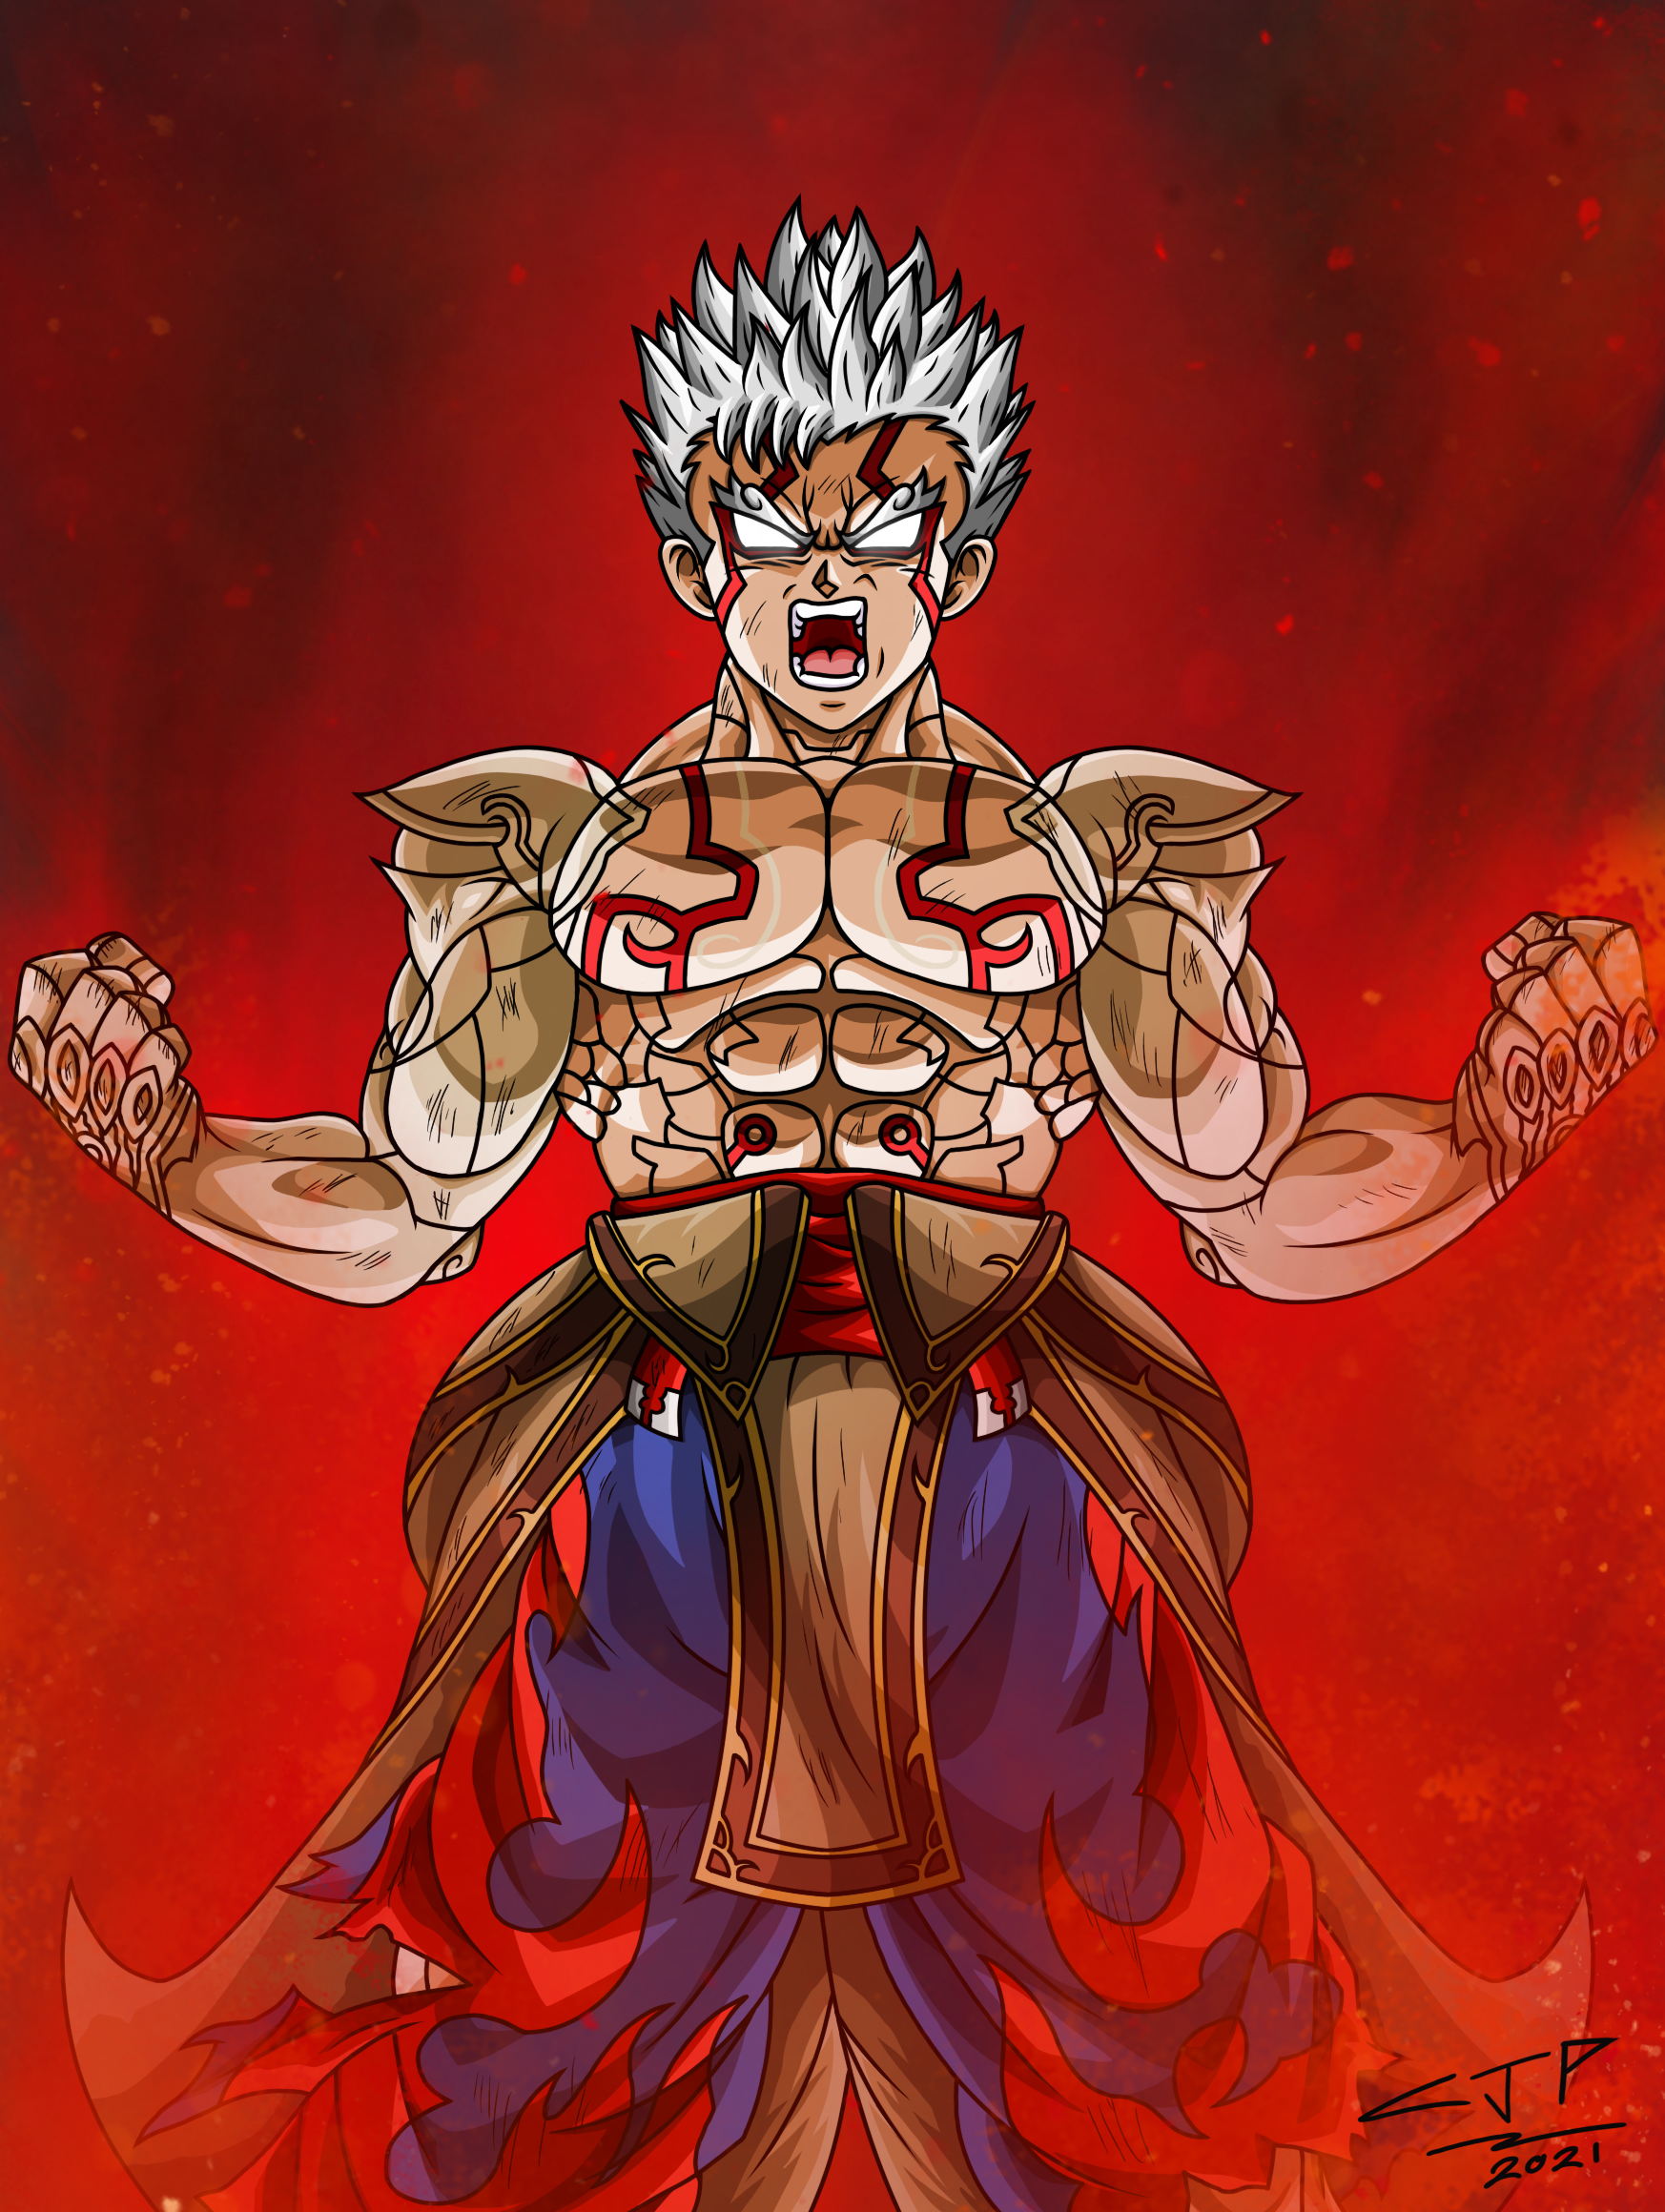 Asura from Asura's Wrath in Dragon Ball Style by SFTSD000 on DeviantArt